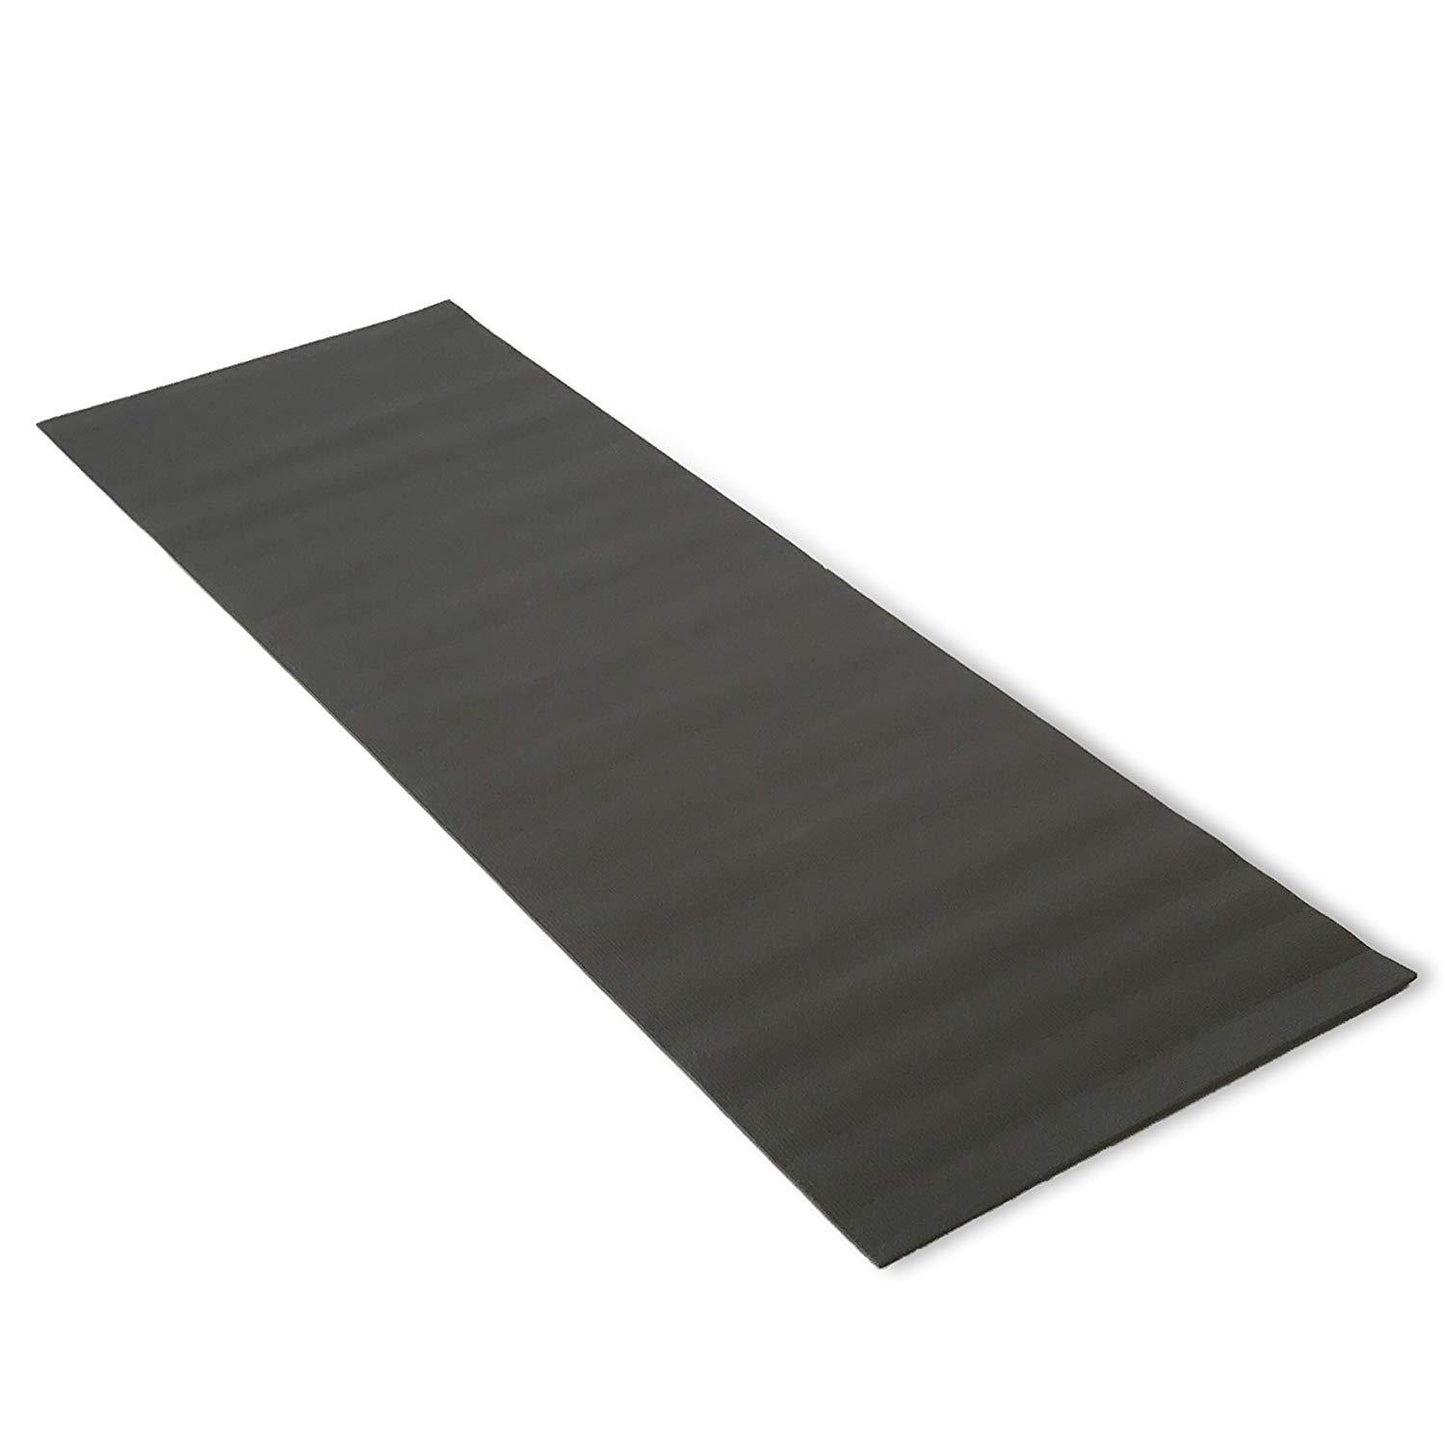 Buy RatMat Yoga Mats - Thick ¼ - Option to Purchase with Yoga